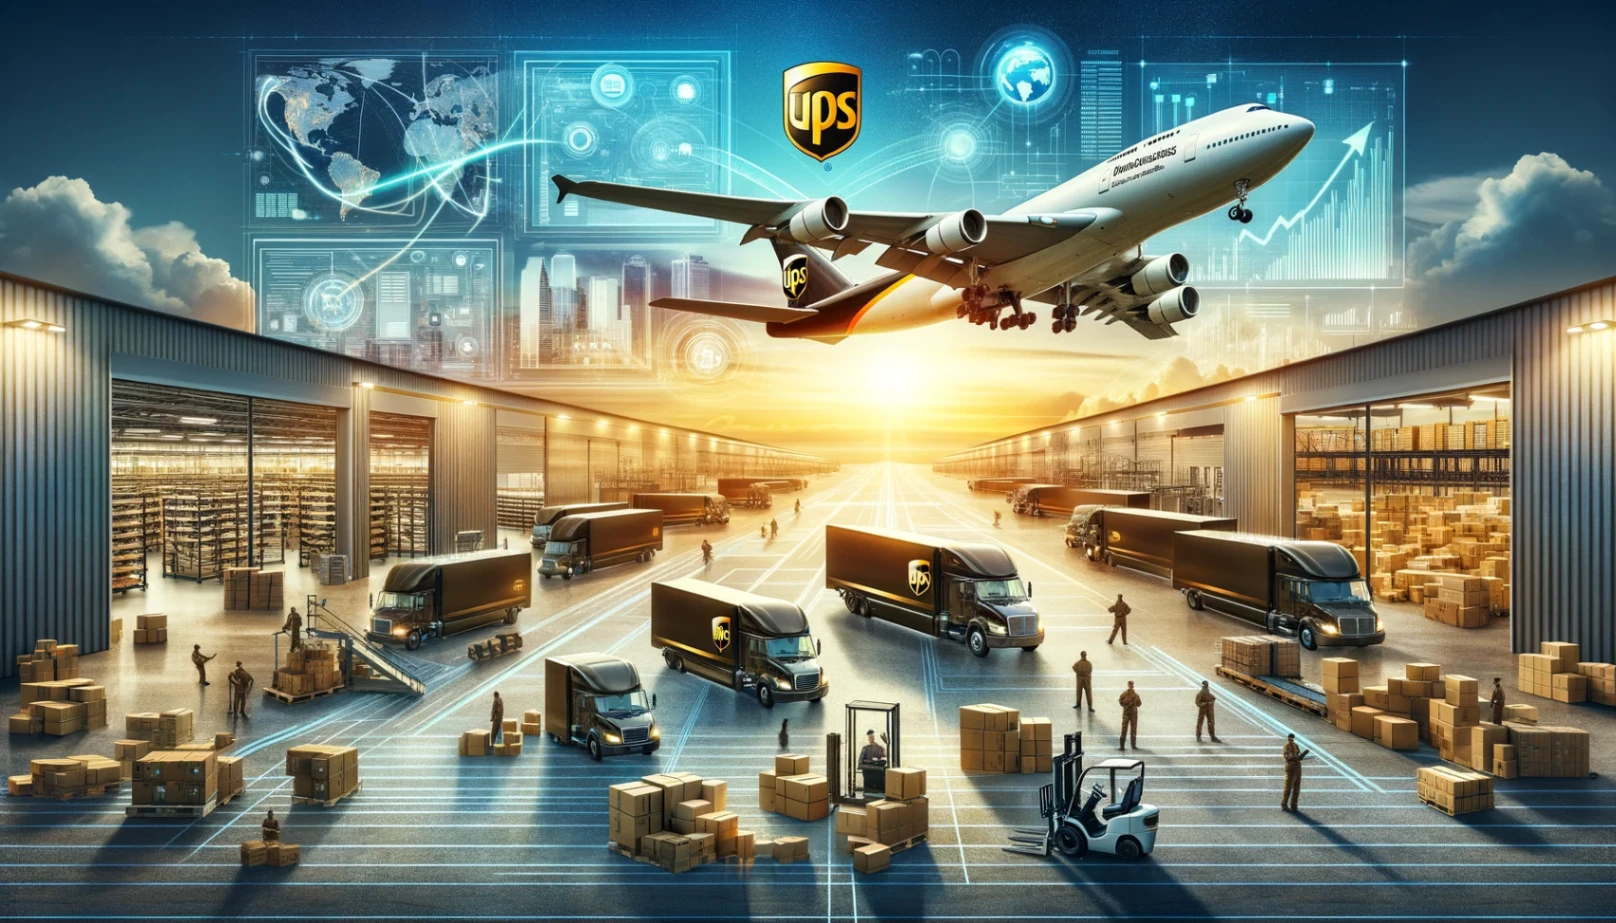 UPS Career Success: Tips to Shine on Your Application